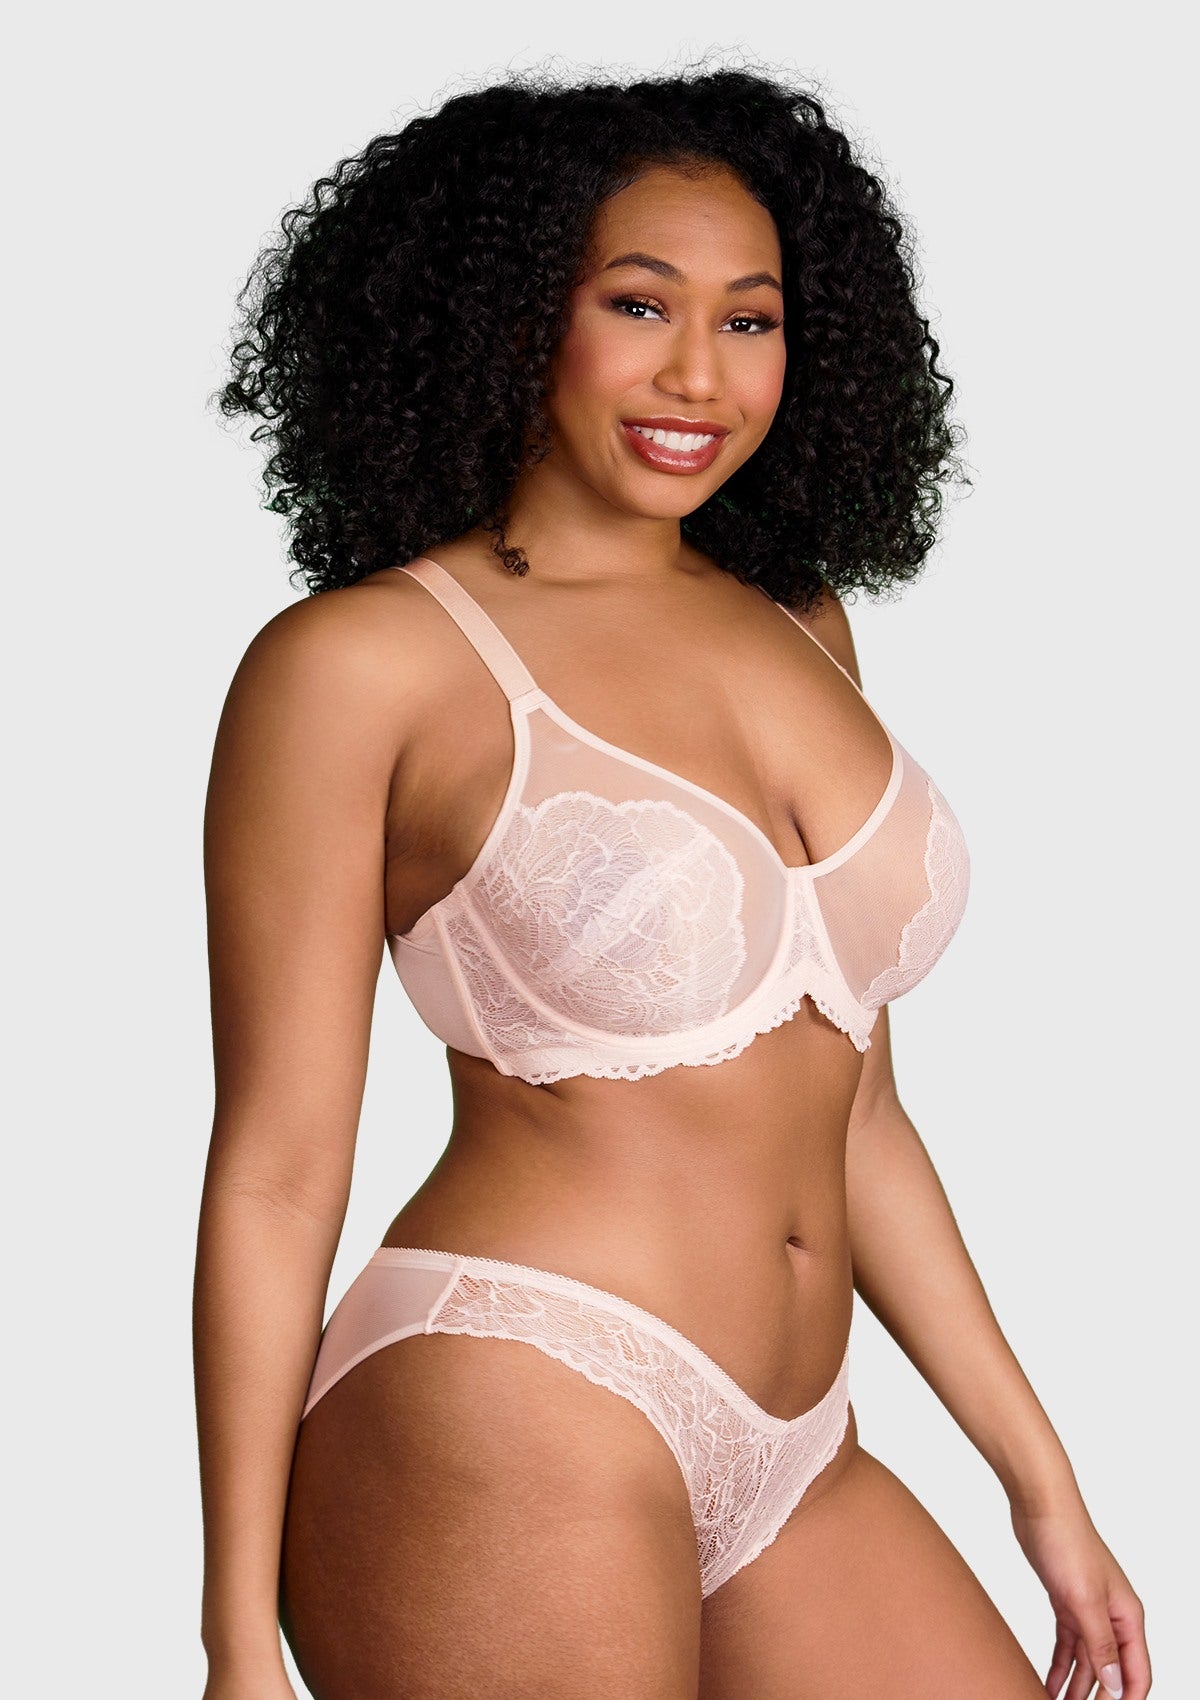 HSIA Blossom Sheer Lace Bra: Comfortable Underwire Bra For Big Busts - White / 46 / DDD/F